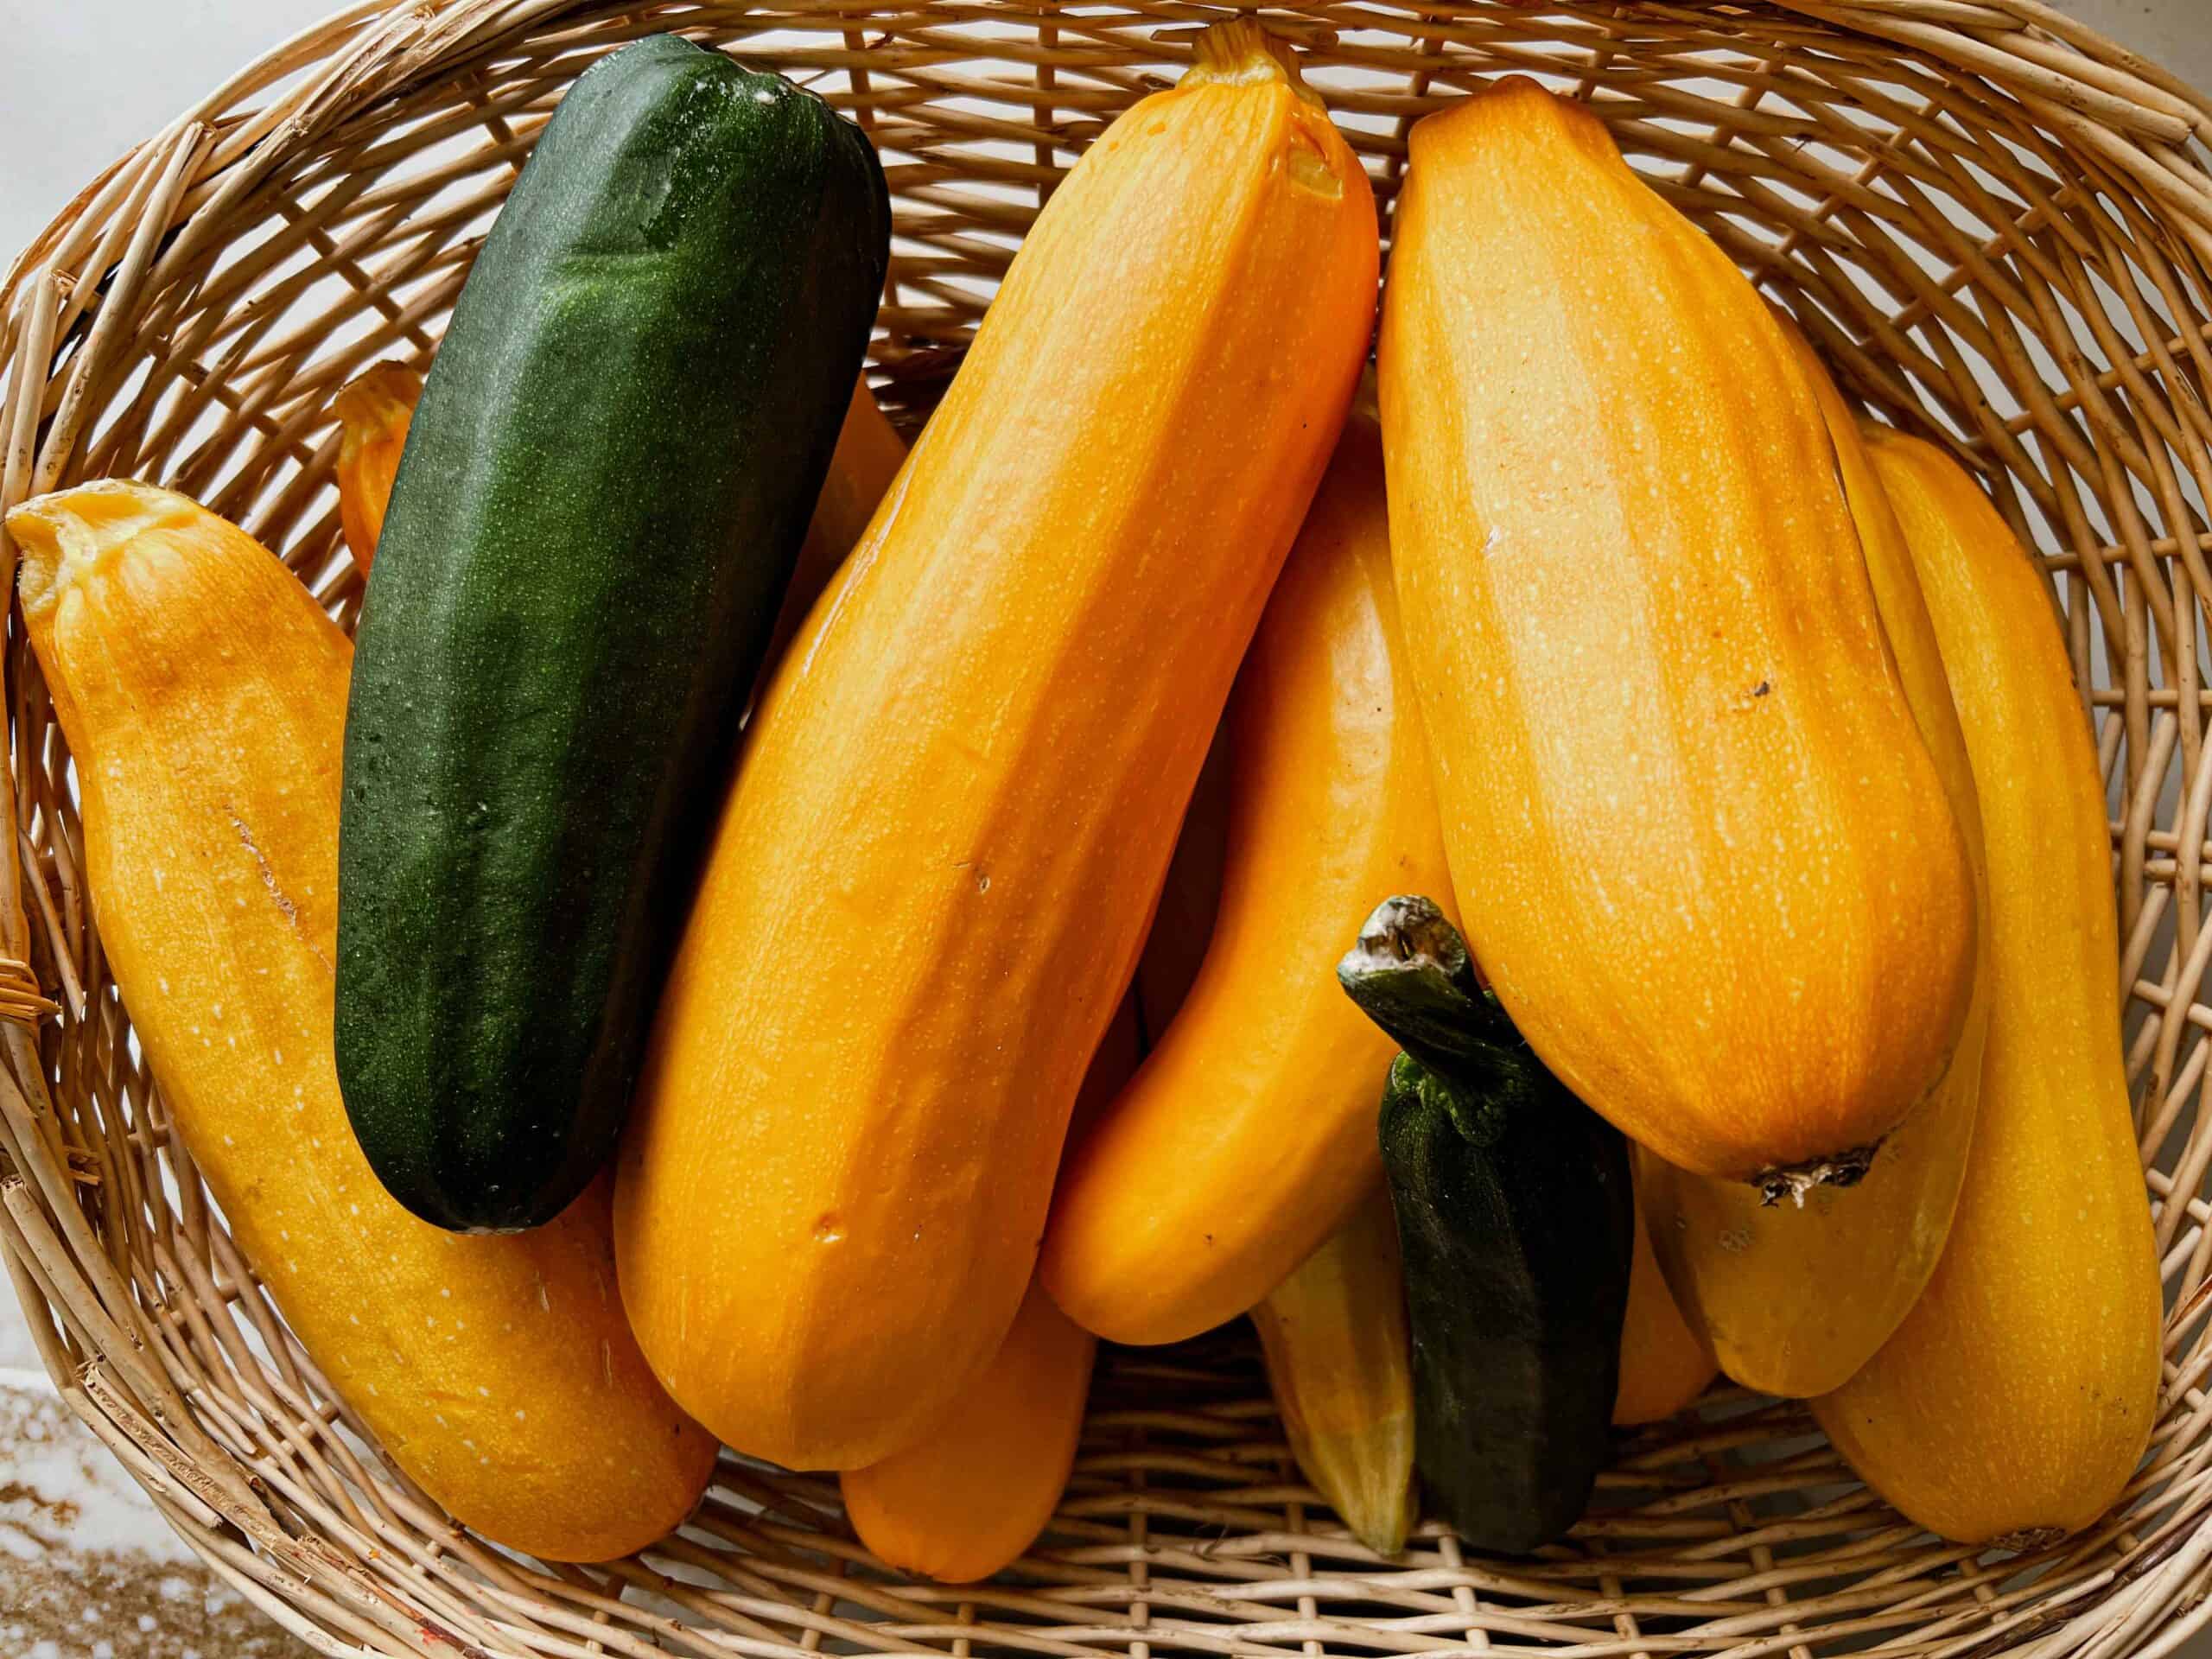 Green and yellow zucchini piled into a wicker harvest basket.